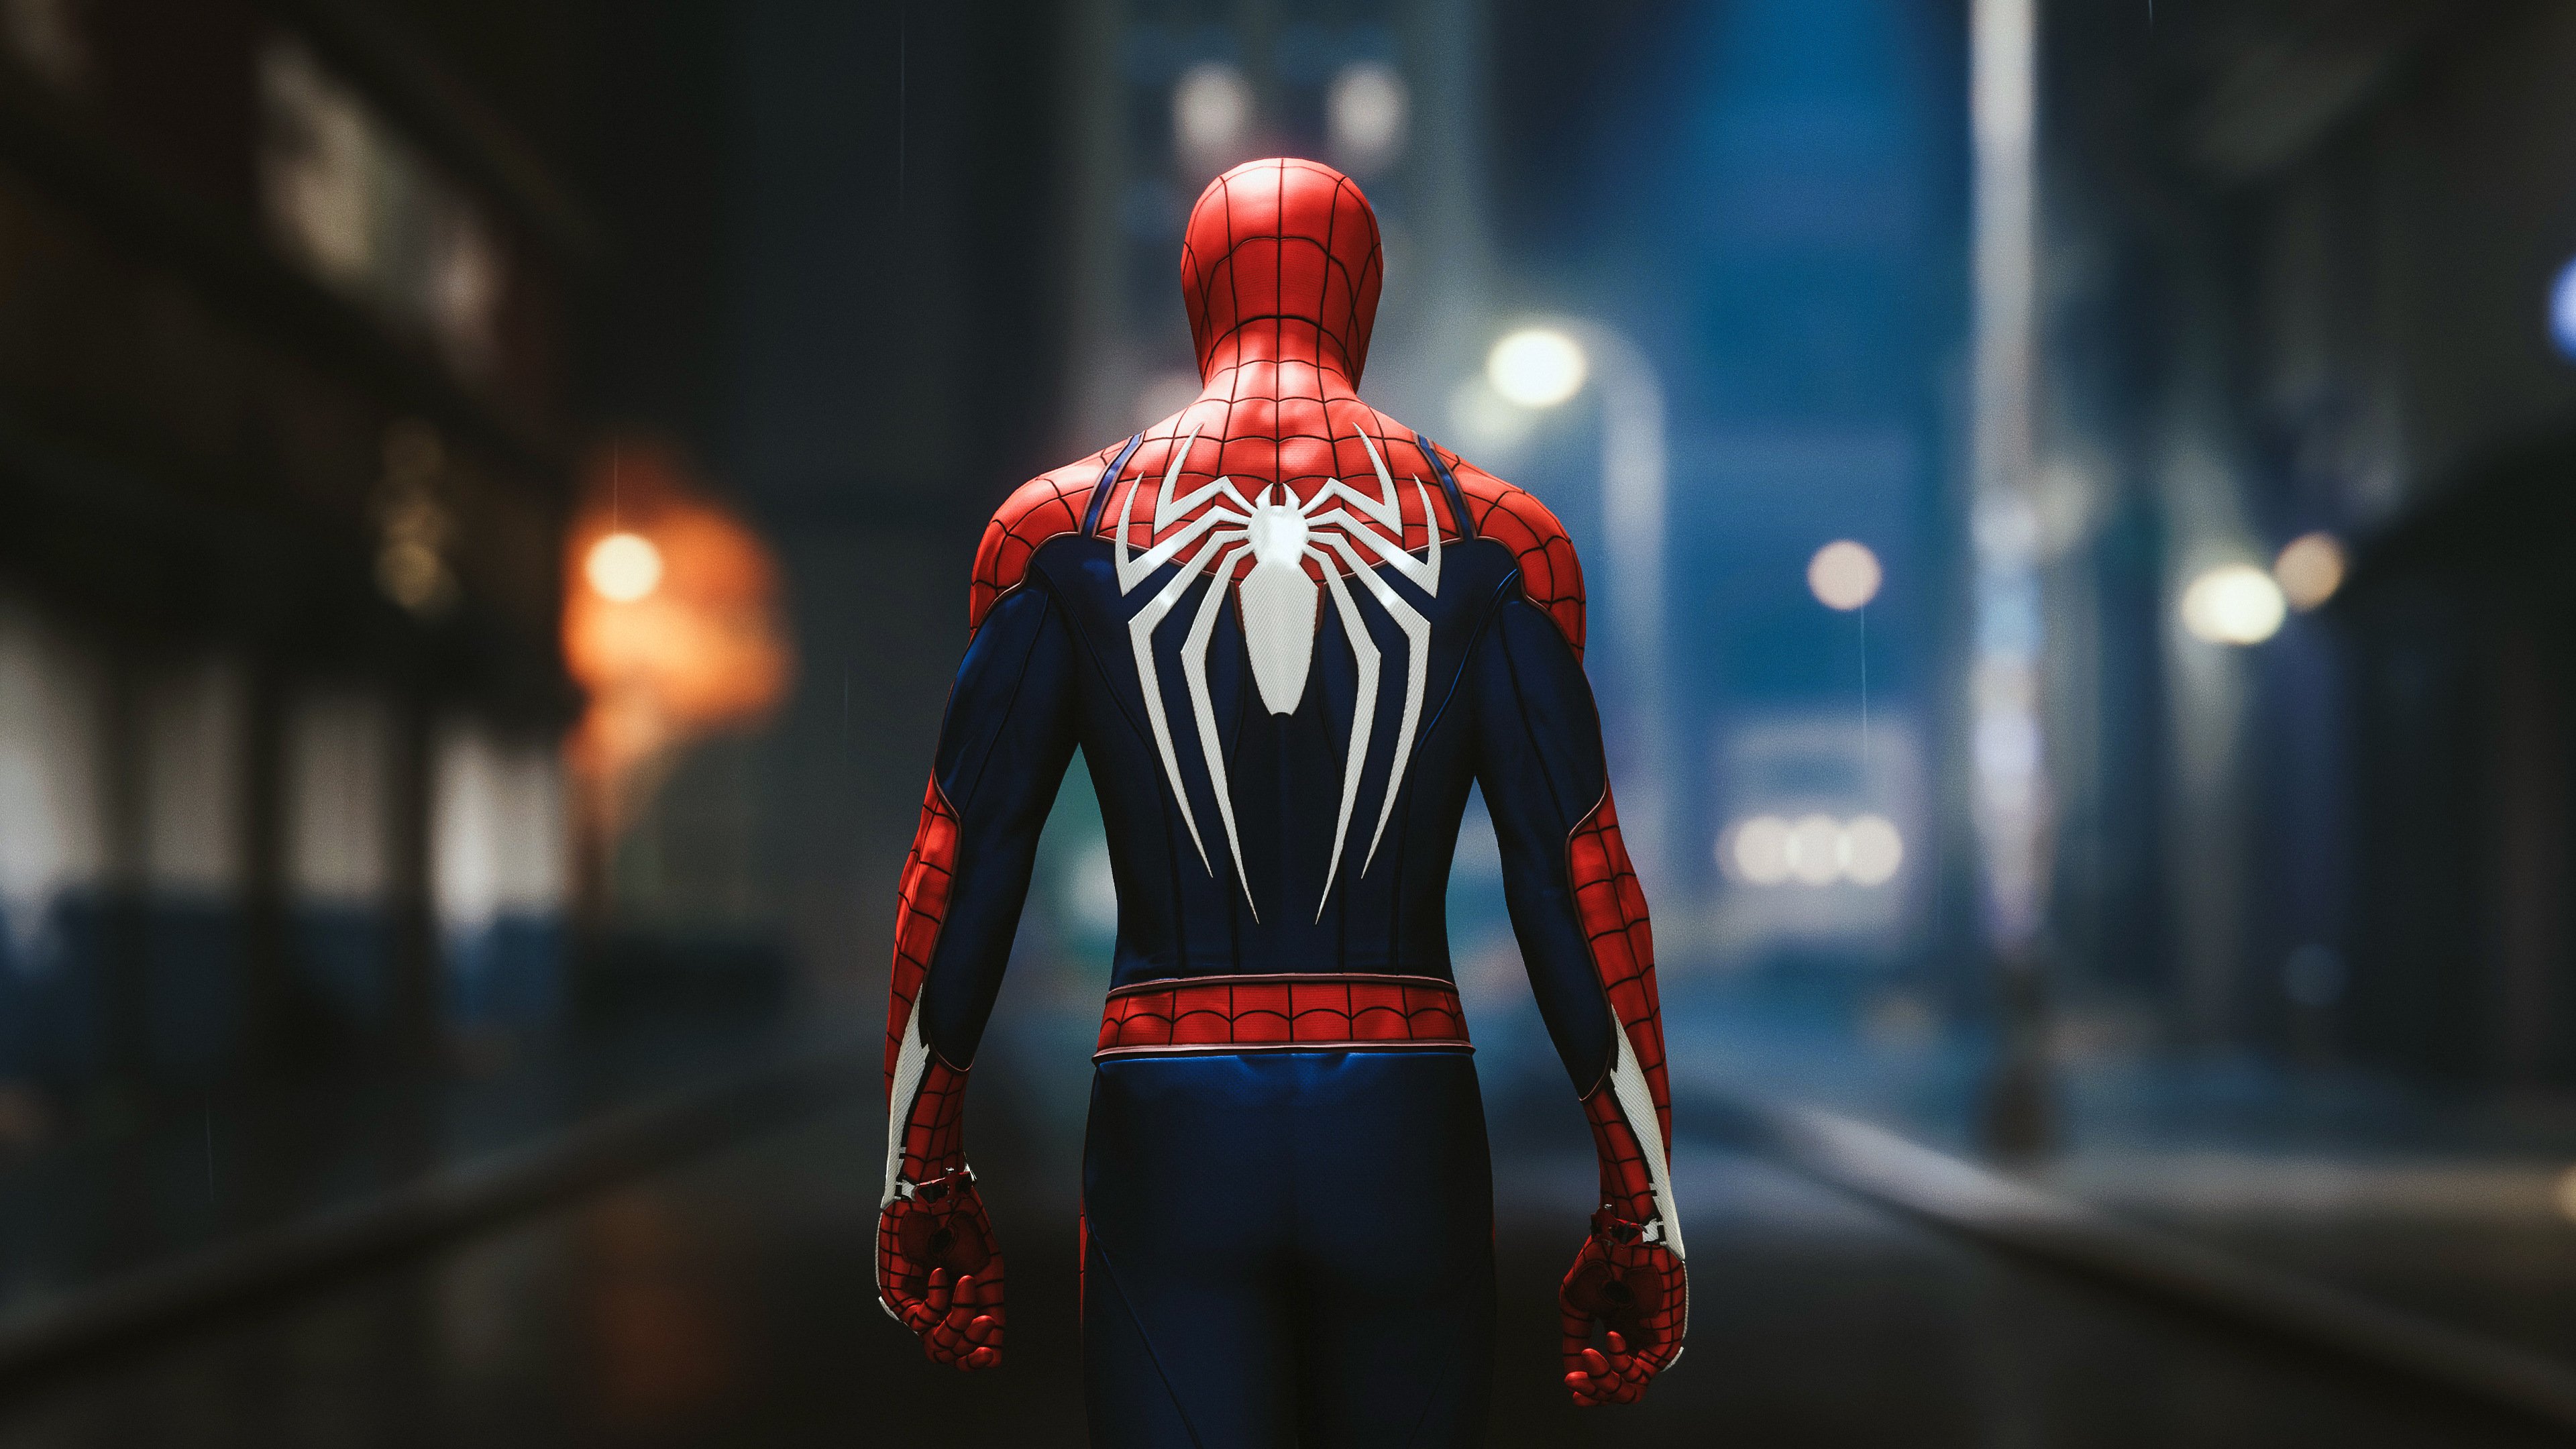 Spider Man (PS4) Advanced Suit 4k Ultra HD Wallpaper. Background